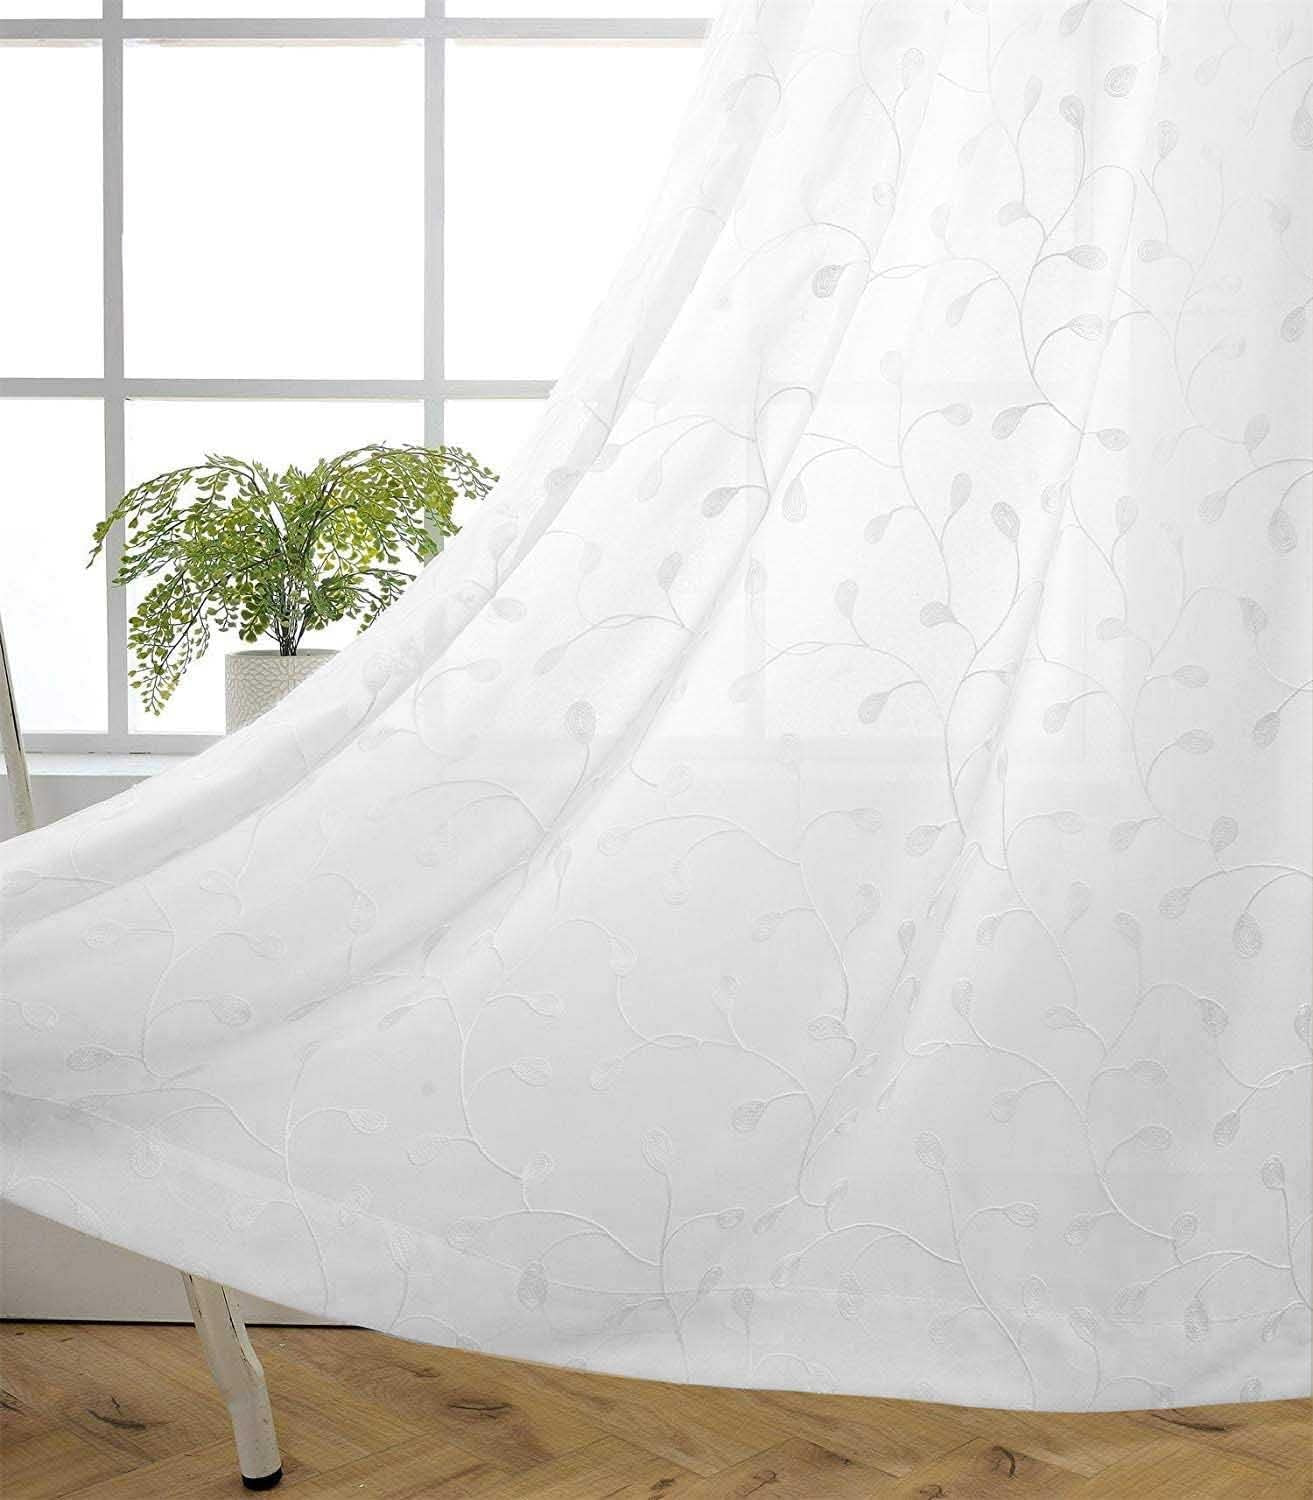 MIUCO Floral Embroidered Semi Sheer Curtains Faux Linen Grommet Curtains for Girls Room 52 X 84 Inch Set of 2, off White  MIUCO Pure White 52X84 Inch 